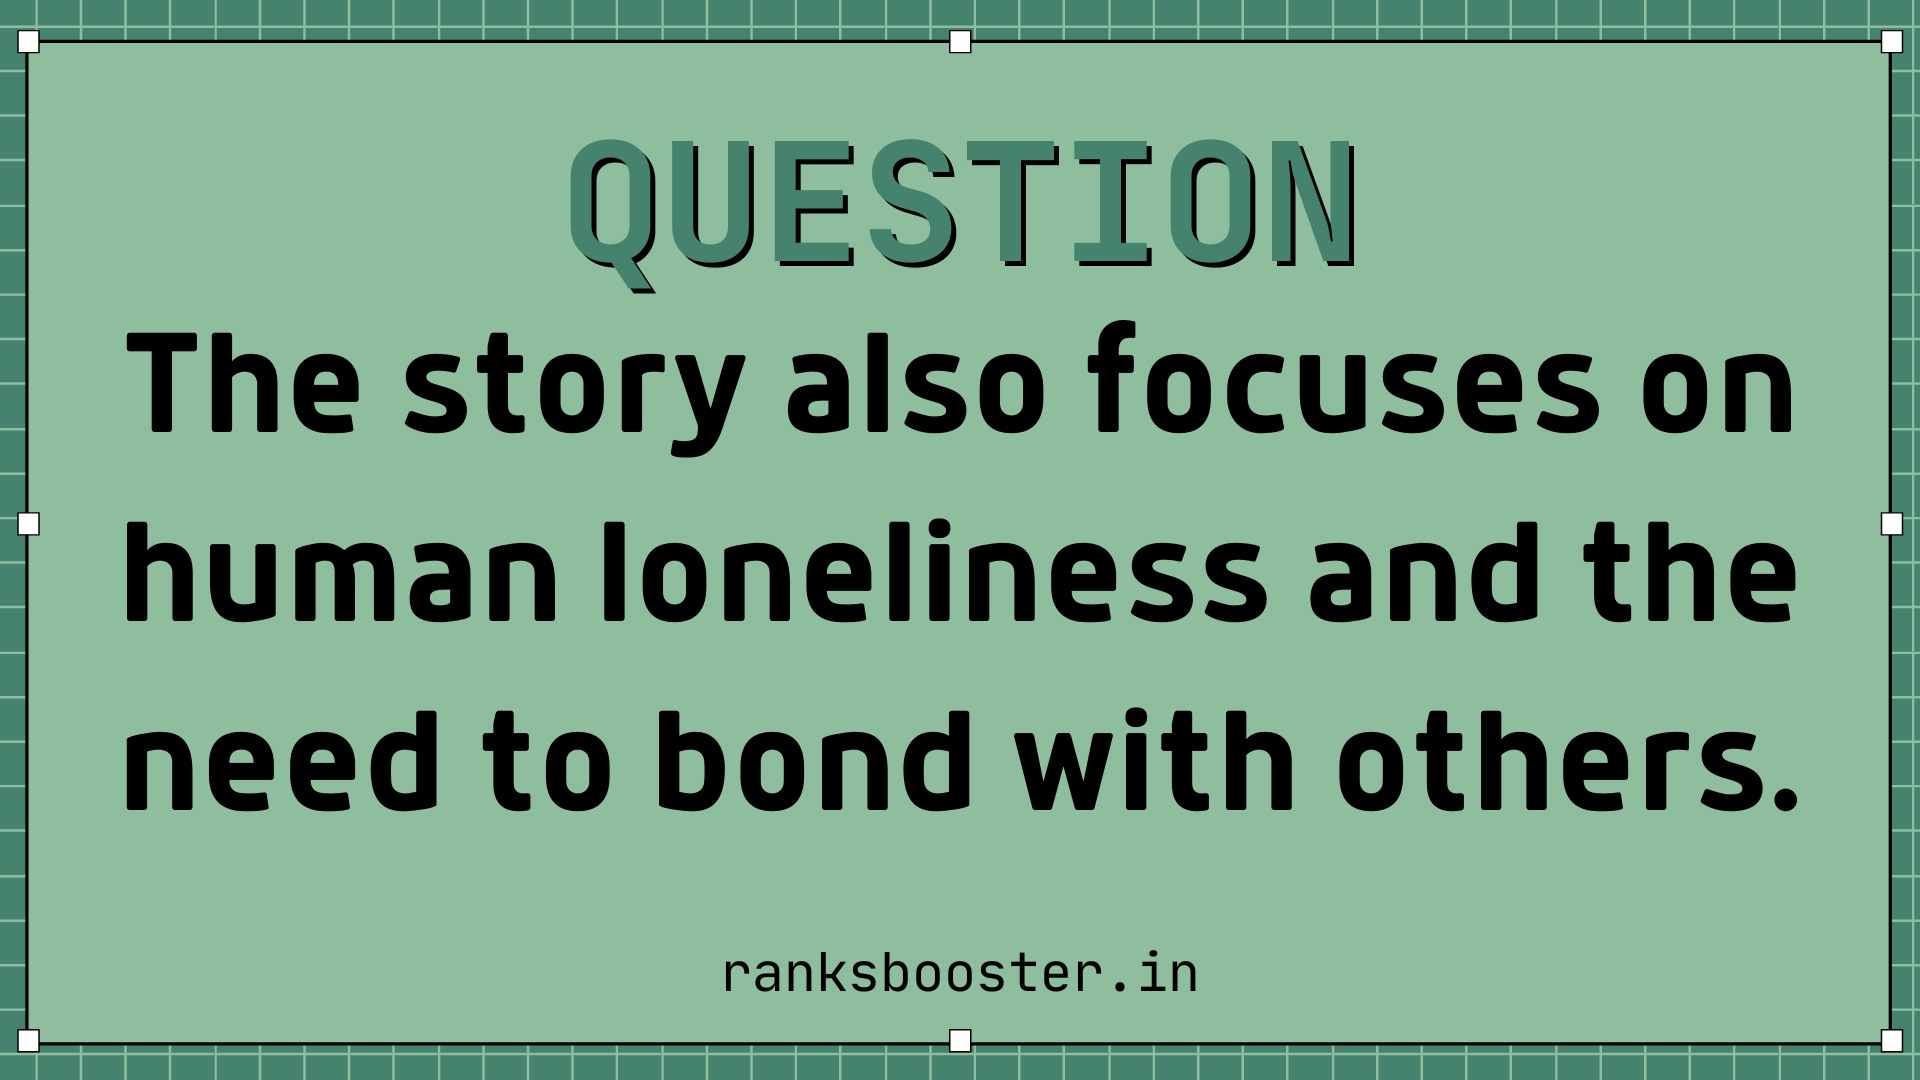 The story also focuses on human loneliness and the need to bond with others